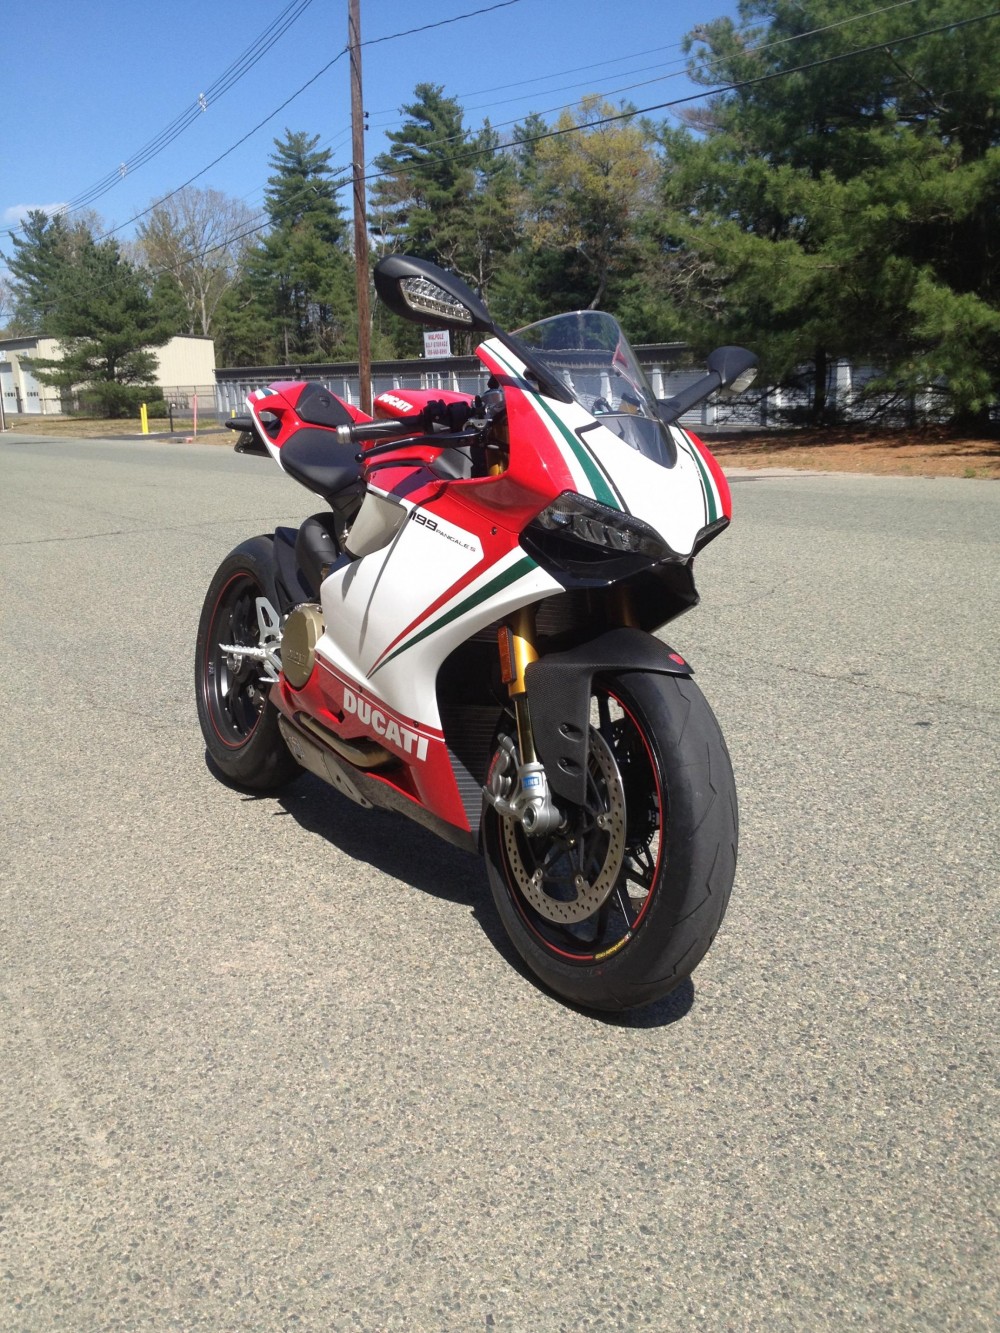 Ducati 1199 S Panigale Tricolore Co may sieu long moi con tim - 10